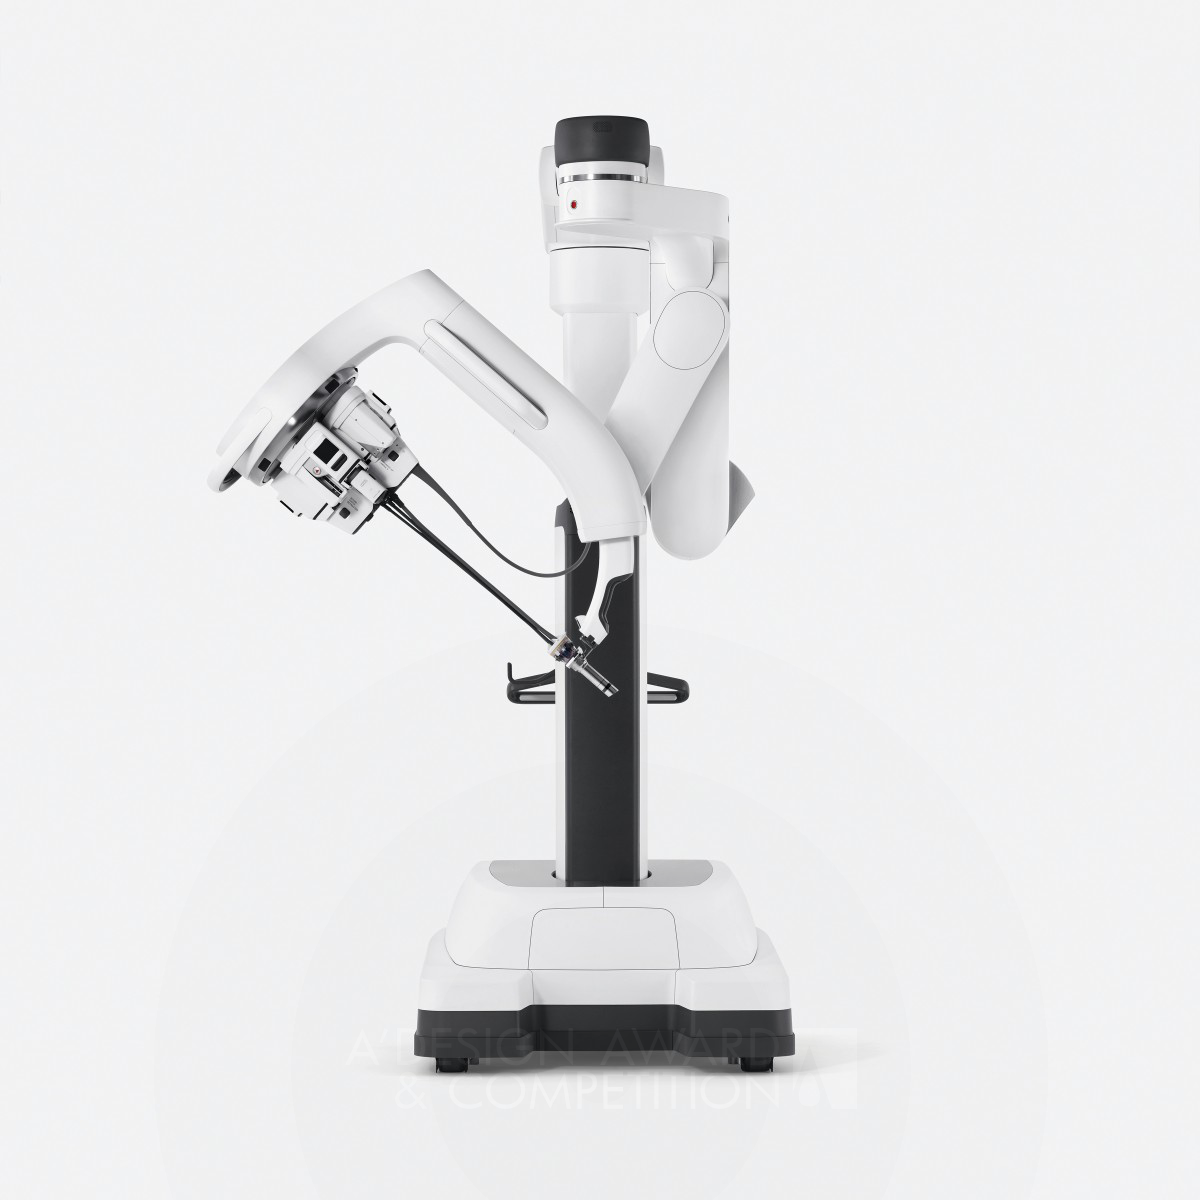 daVinci SP  Surgical System by Intuitive Global Design Team